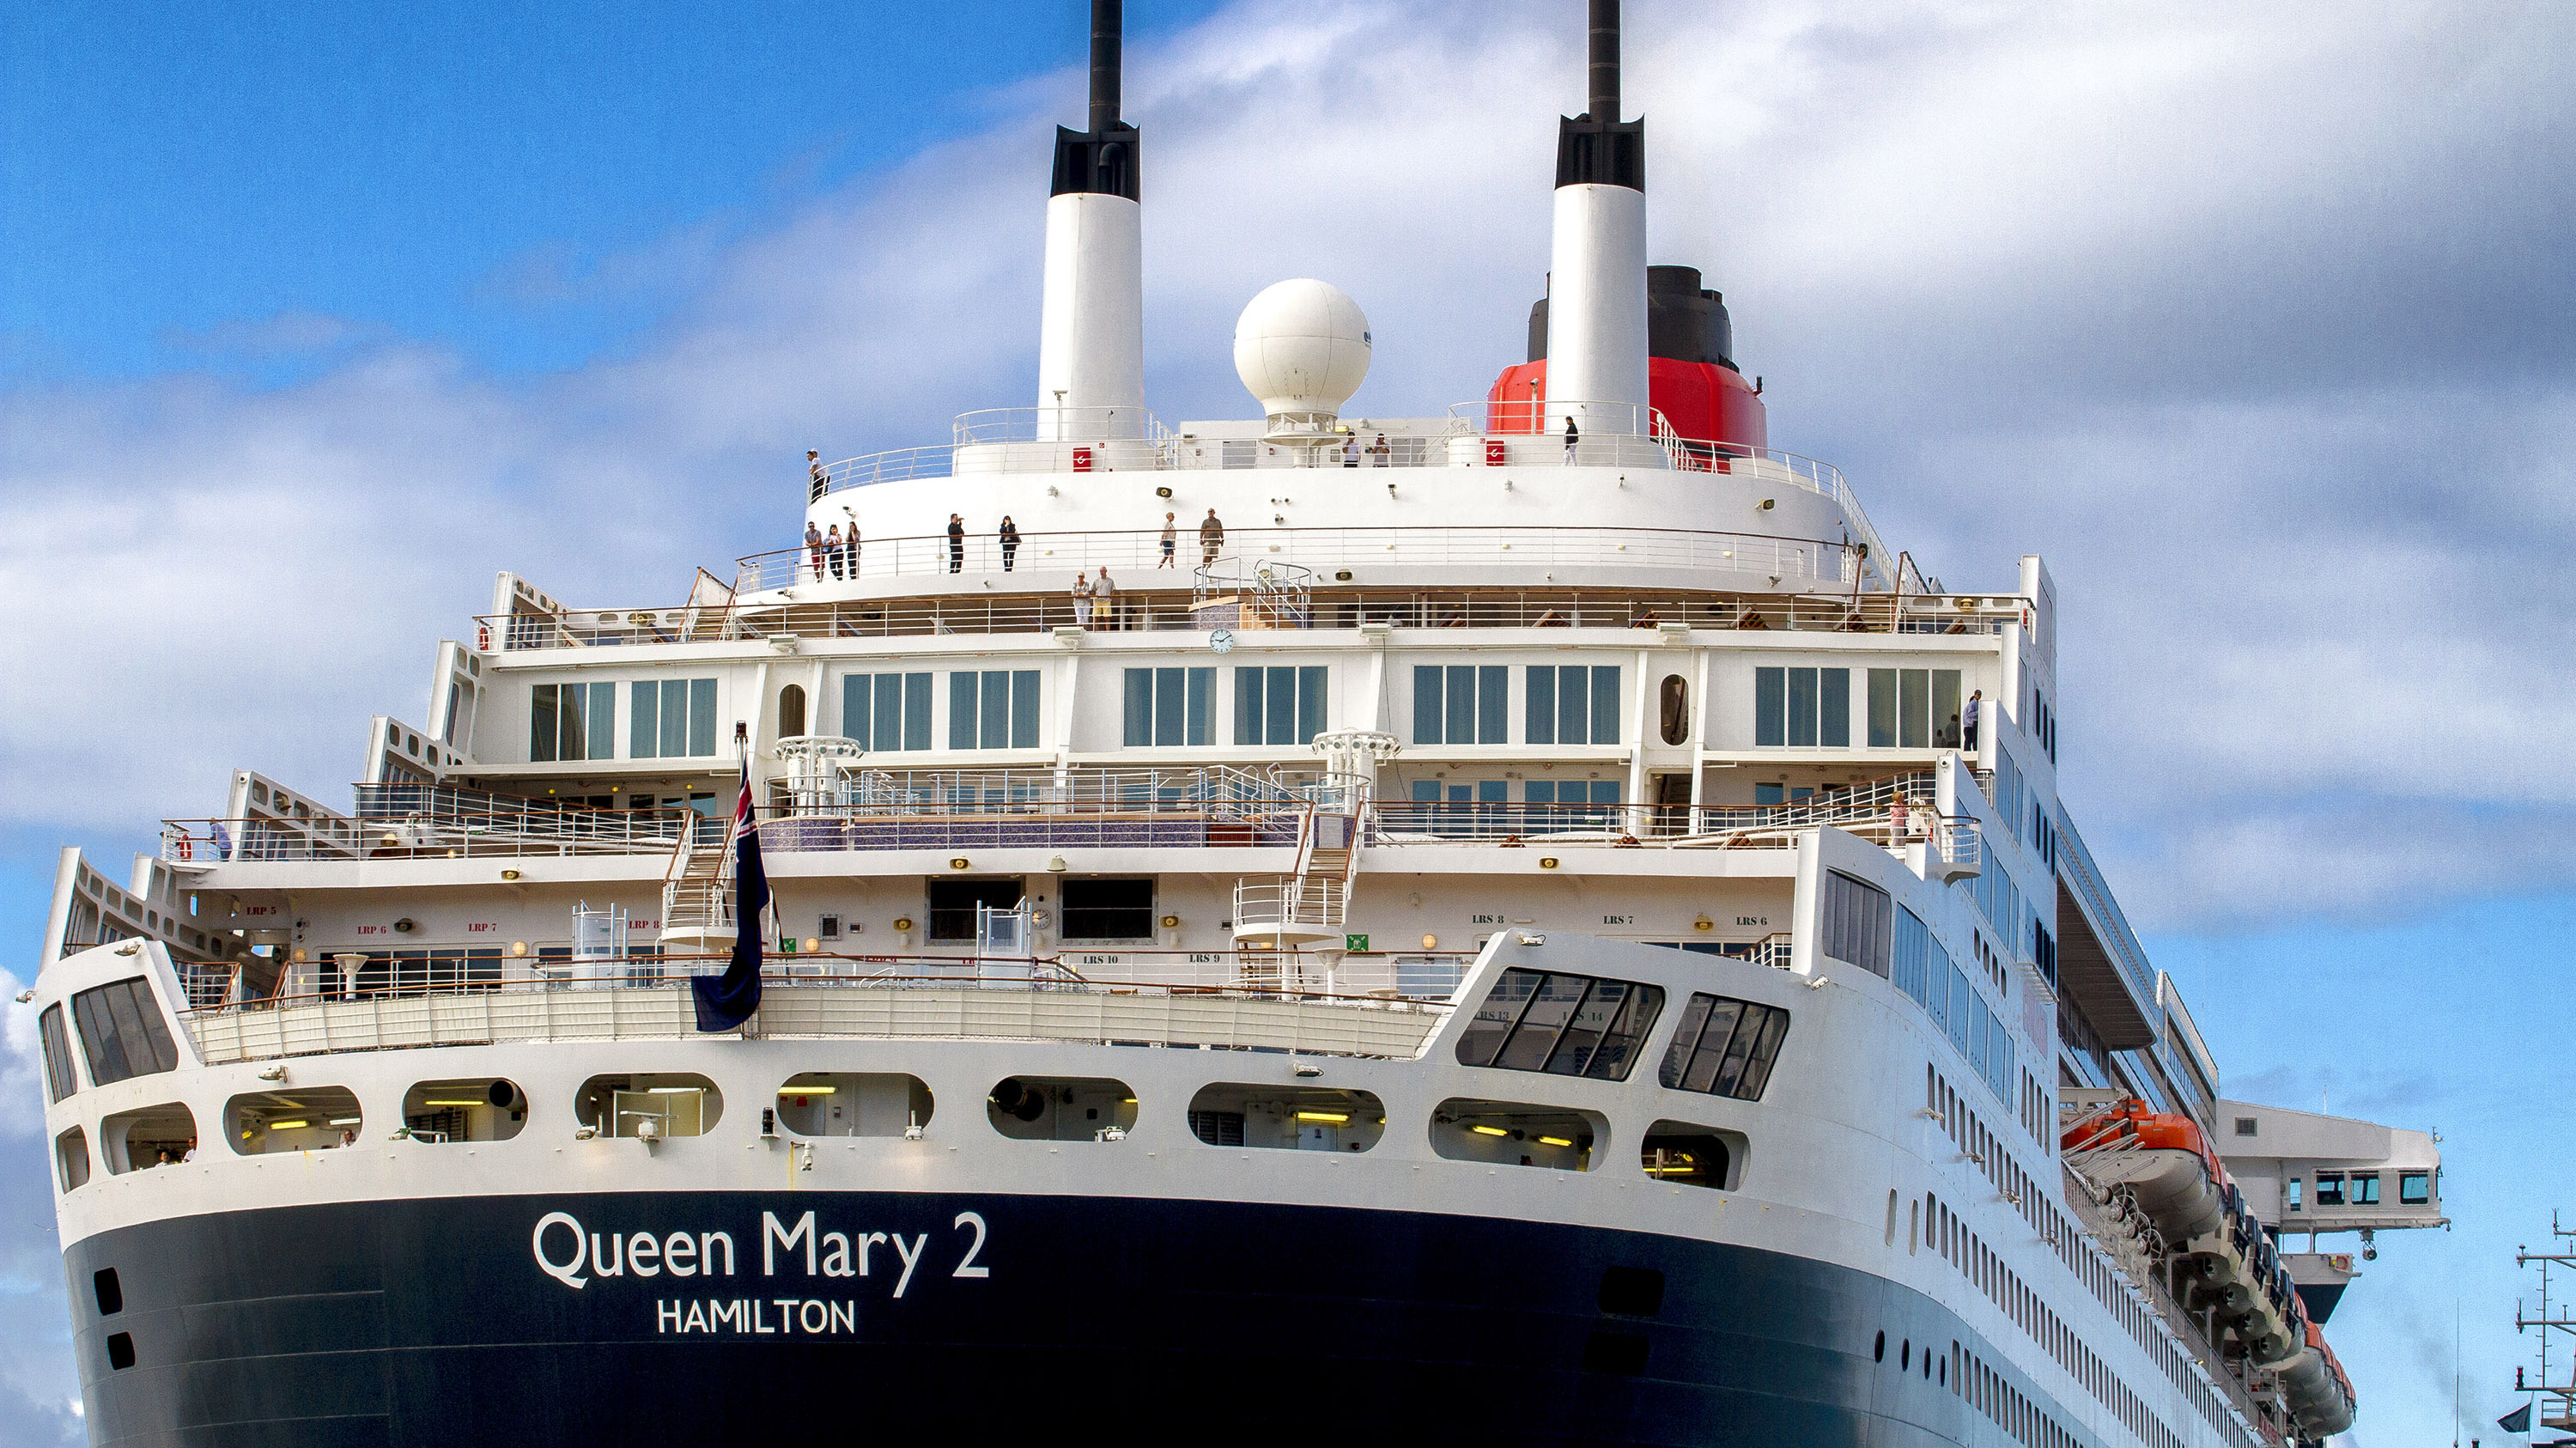 Cunard's flagship Queen Mary 2 in Melbourne is affected by the cancellations.